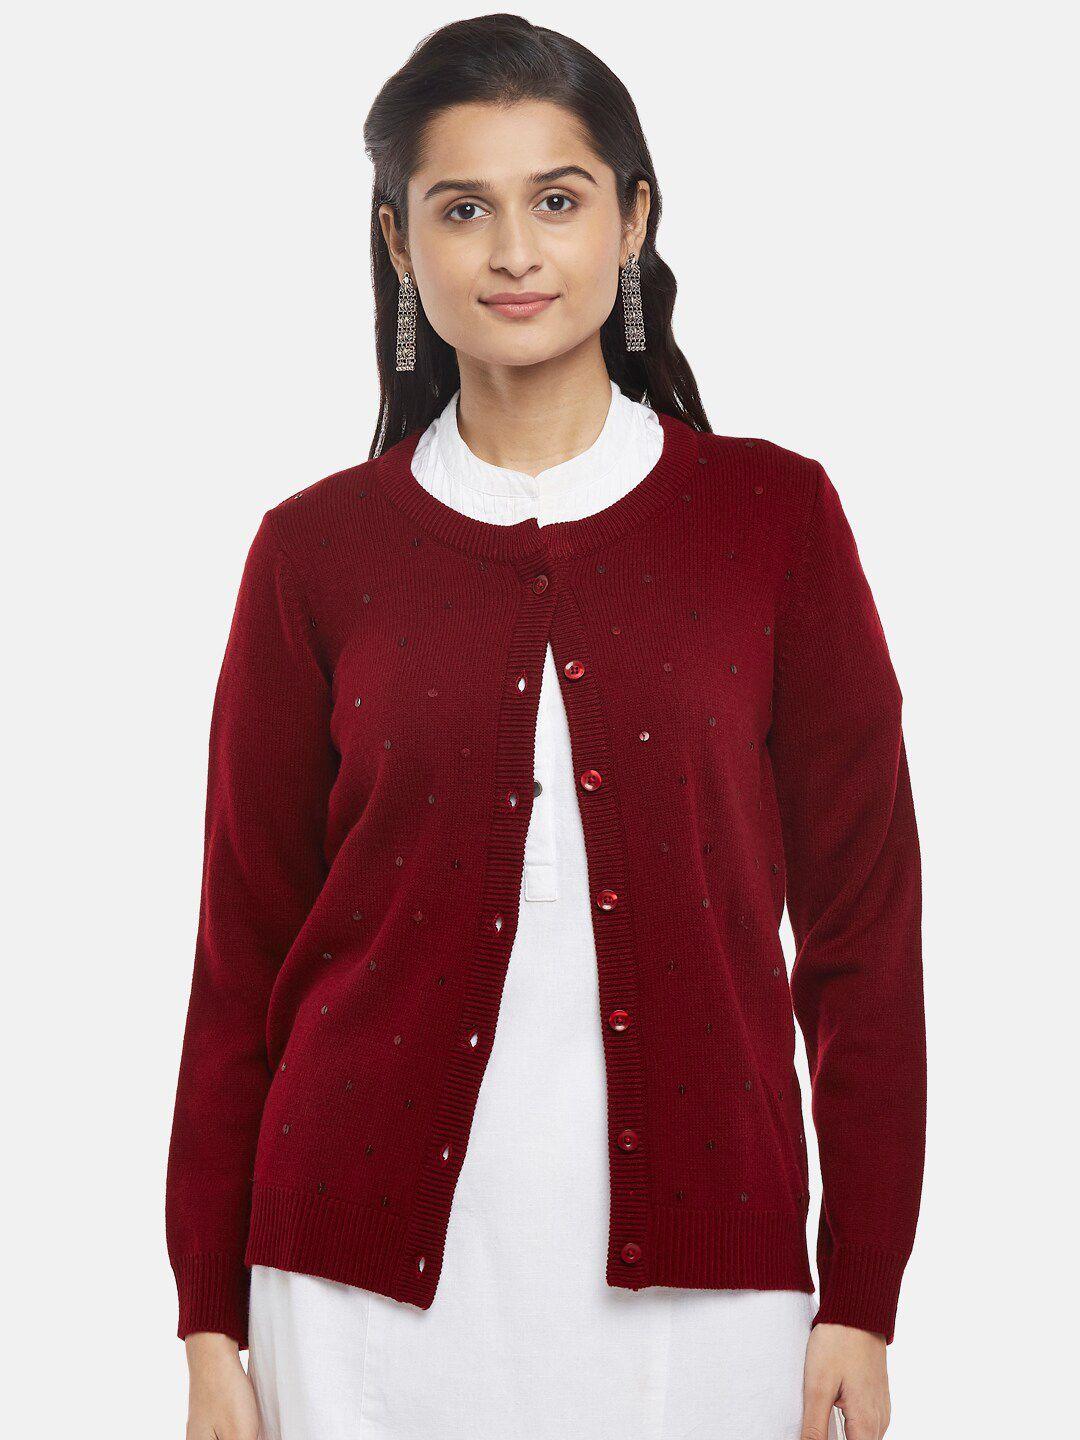 rangmanch by pantaloons women maroon ribbed acrylic cardigan with embellished detail